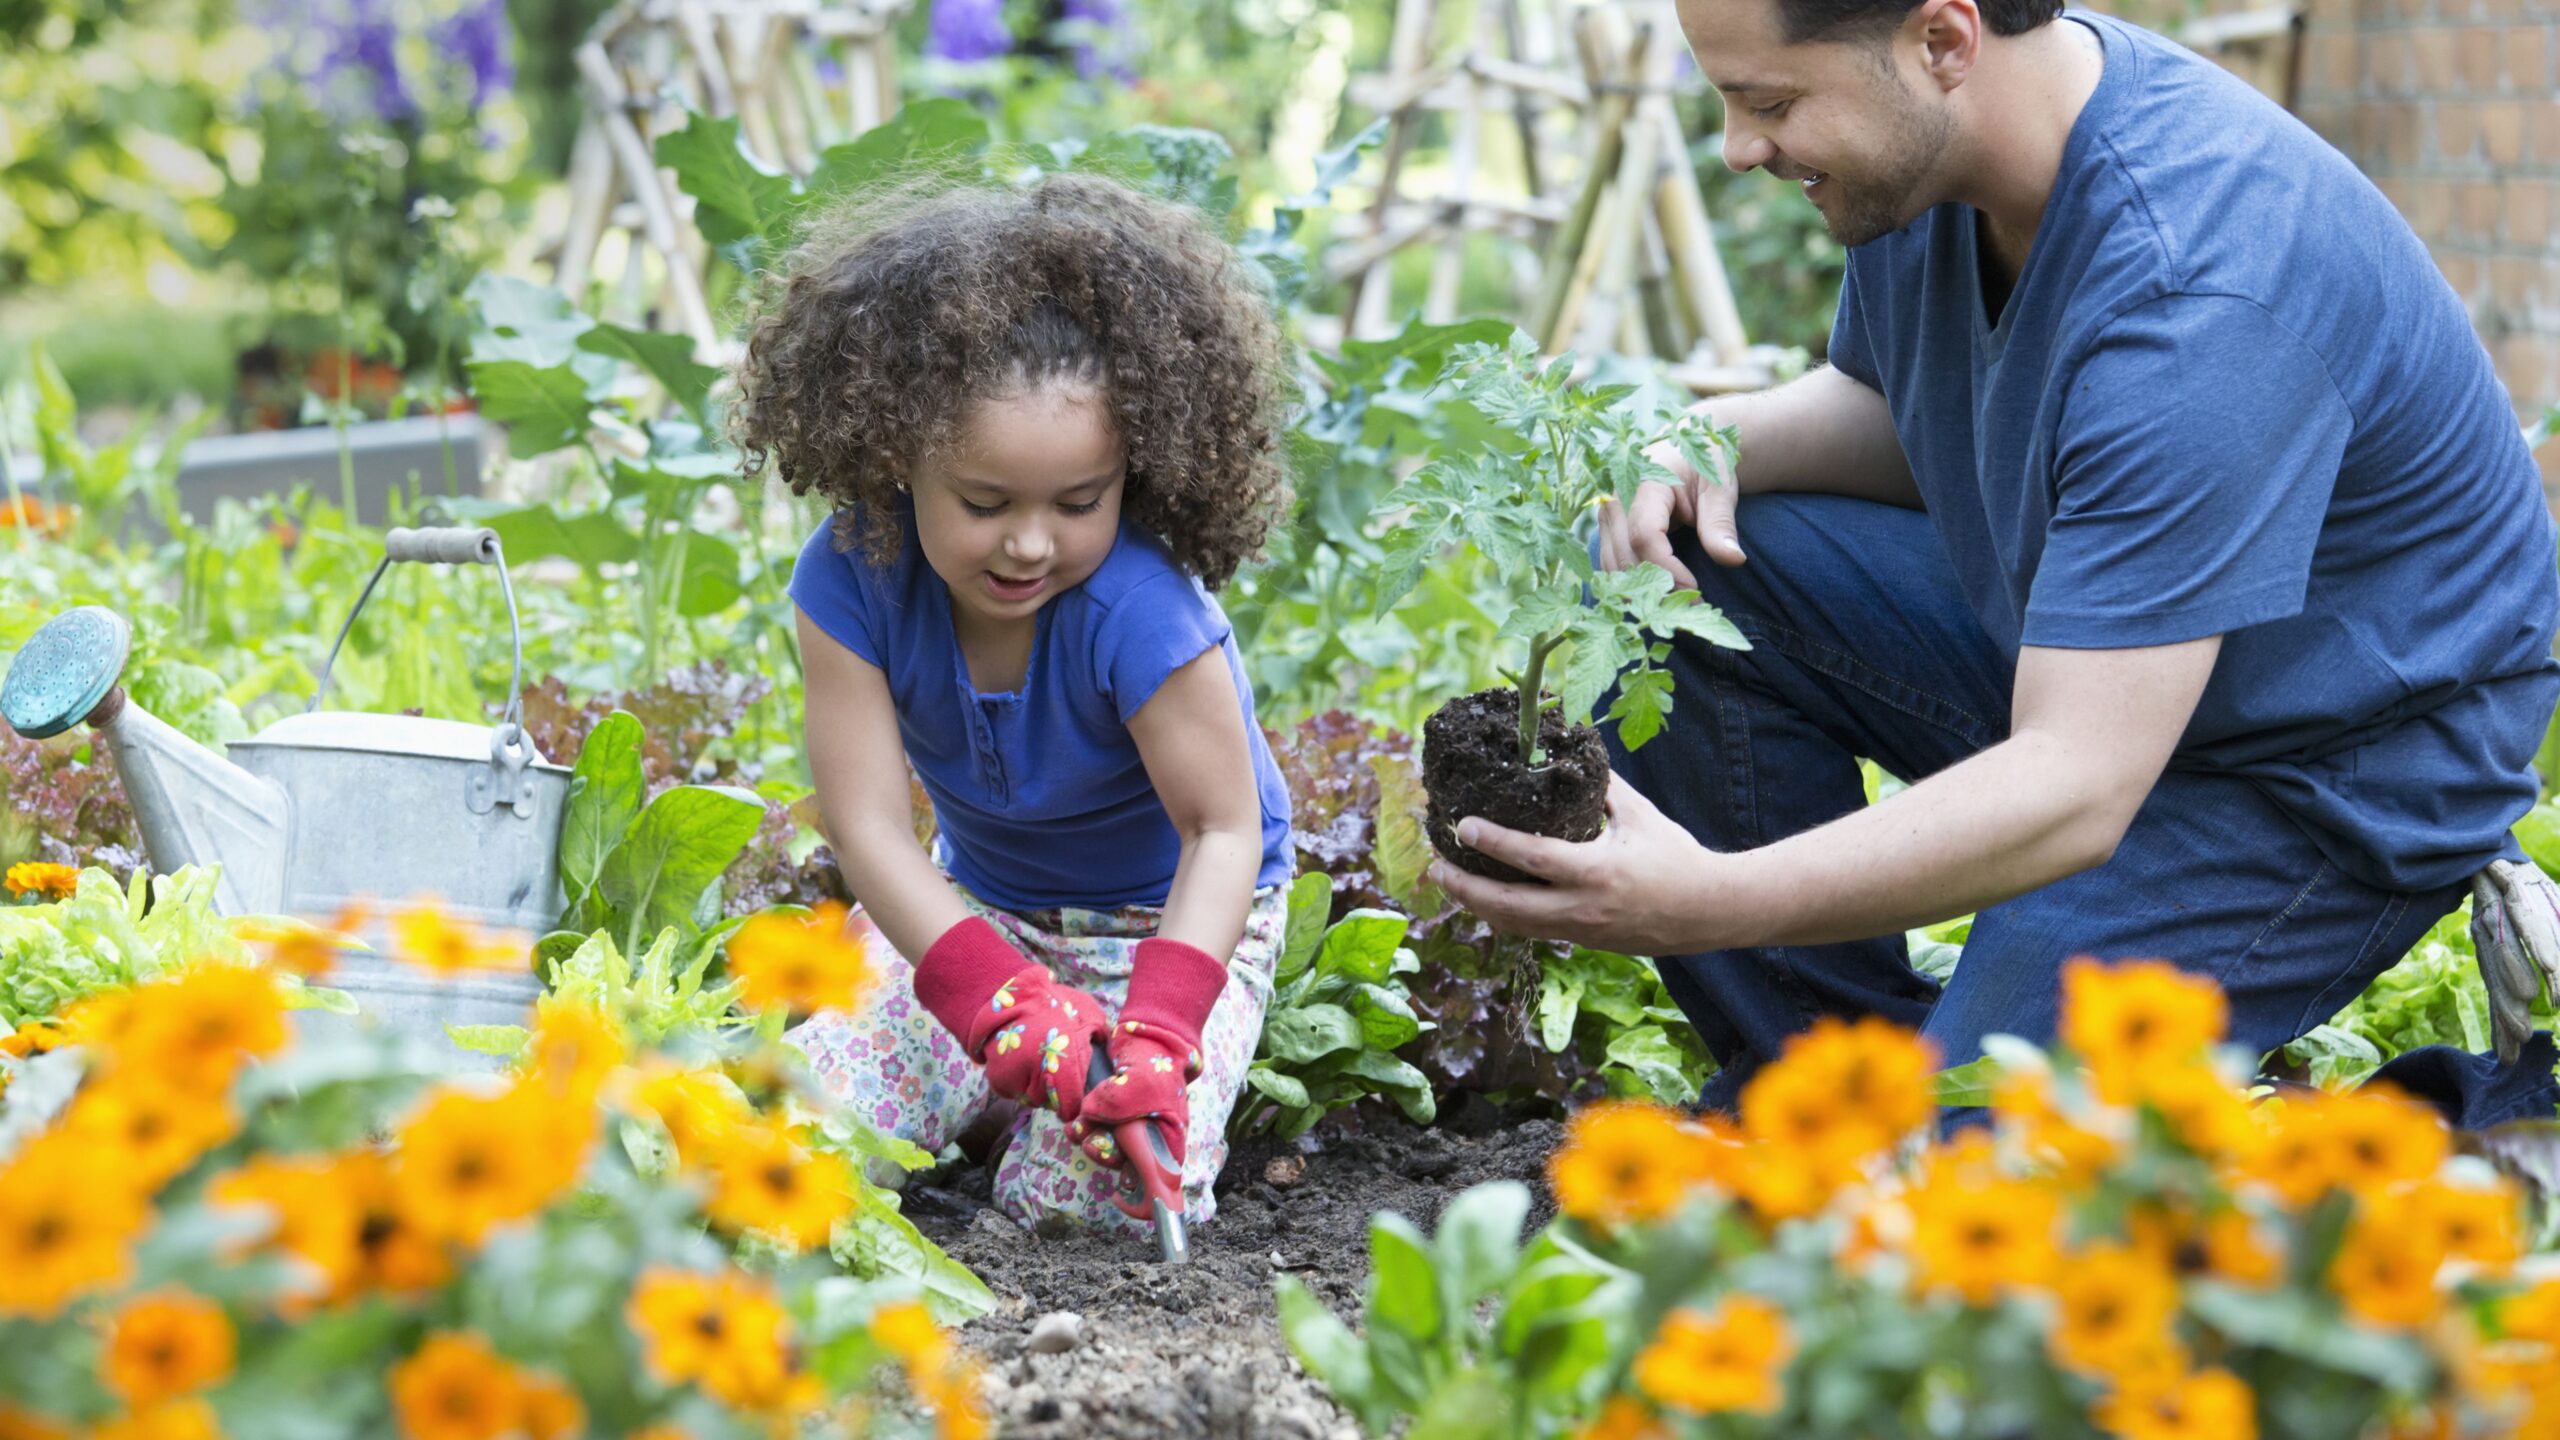 3 Things To Teach Your Kids About Helping In the Garden